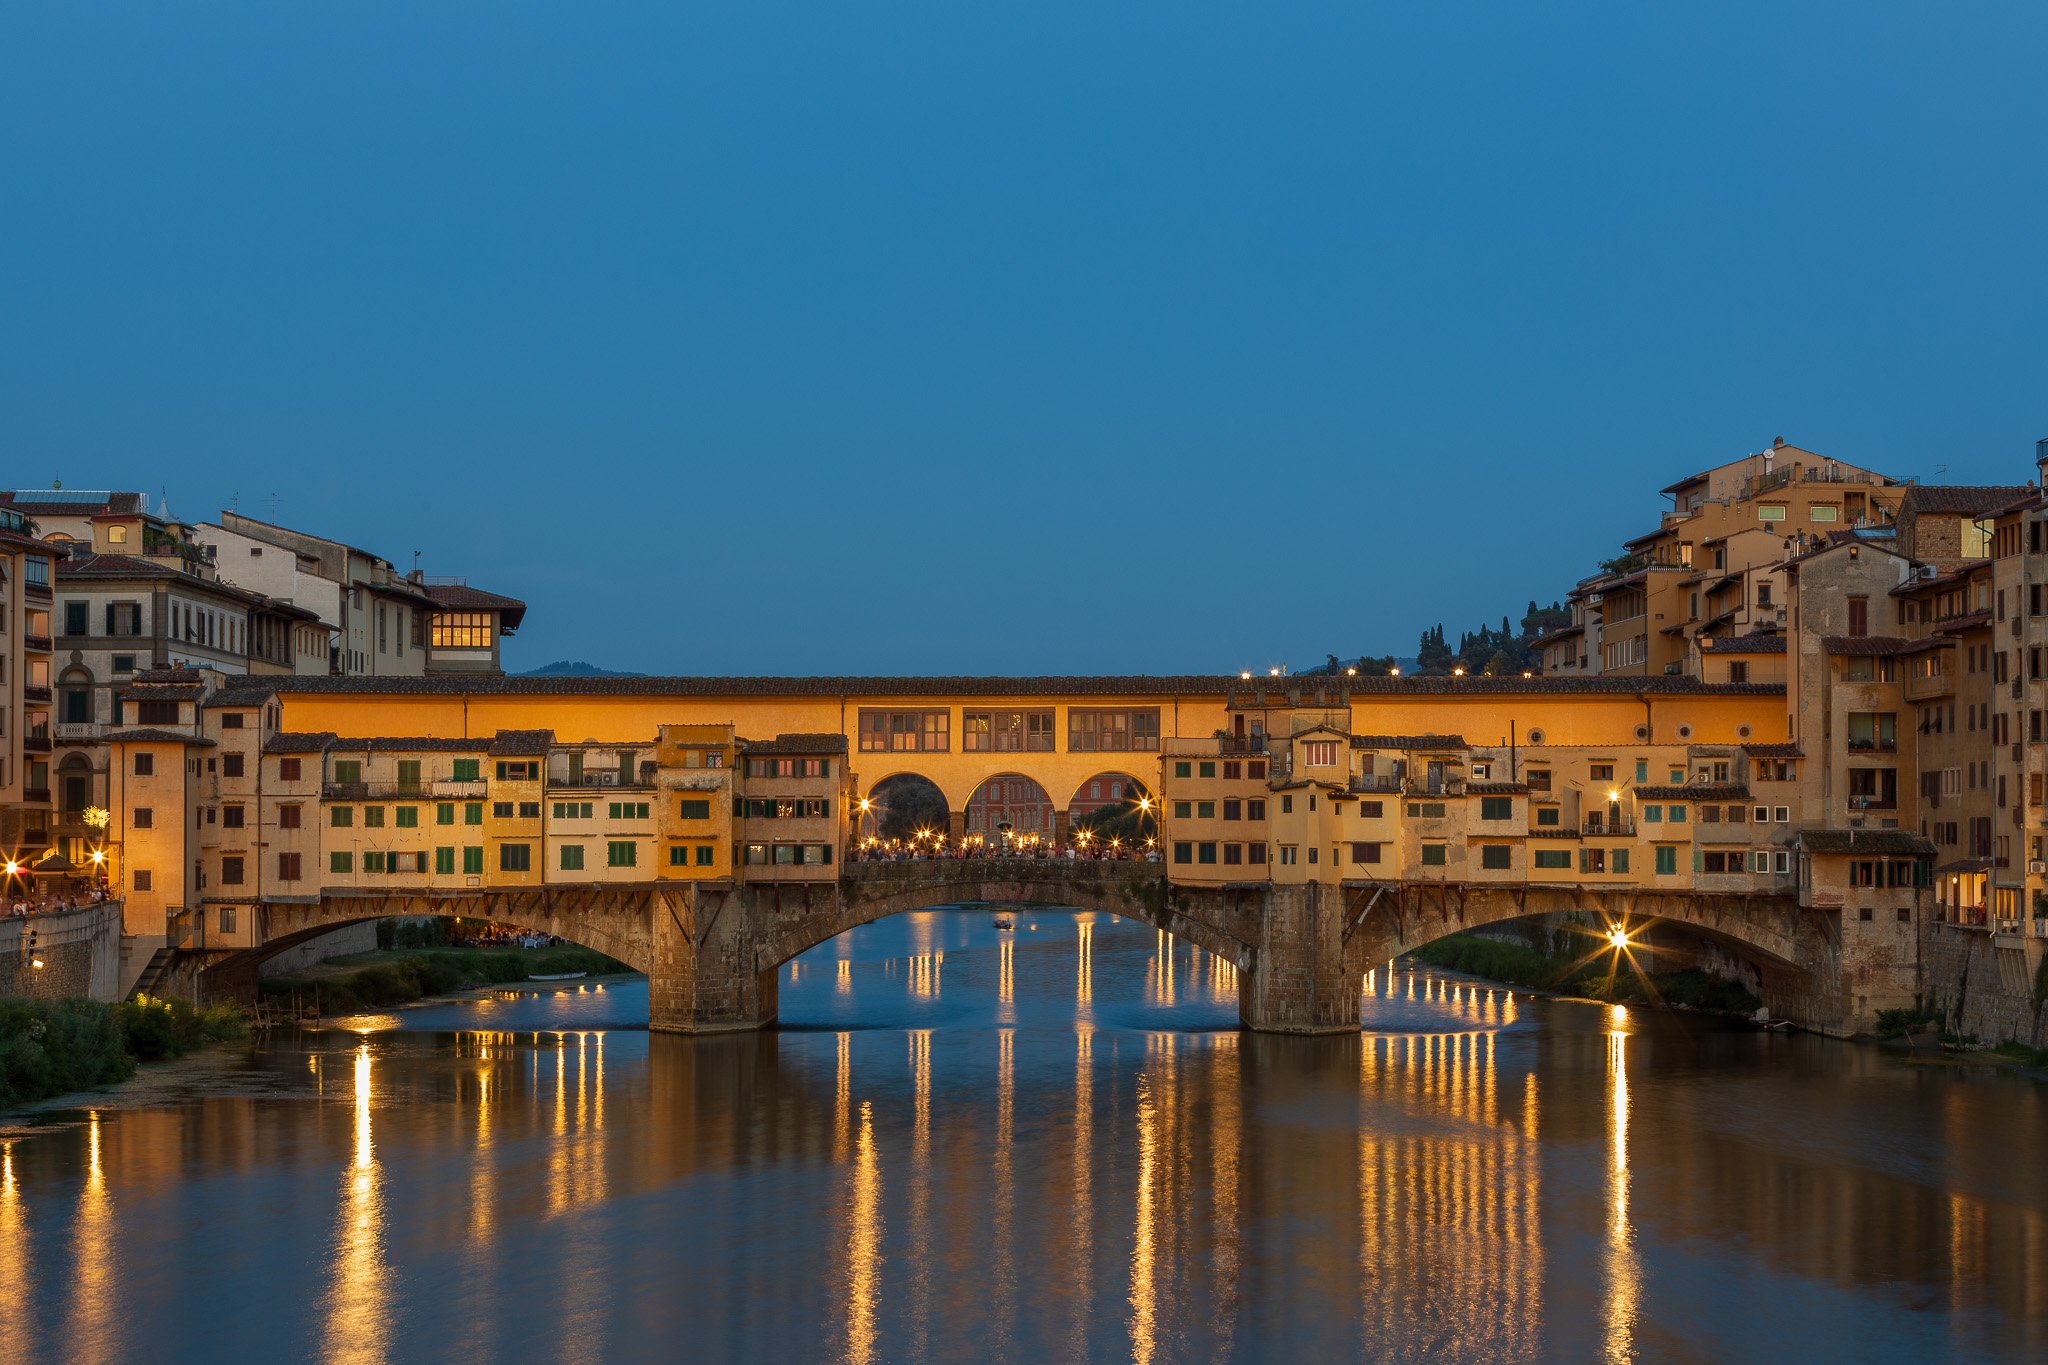 Florence, Italy-2517-July 26, 2019.jpg